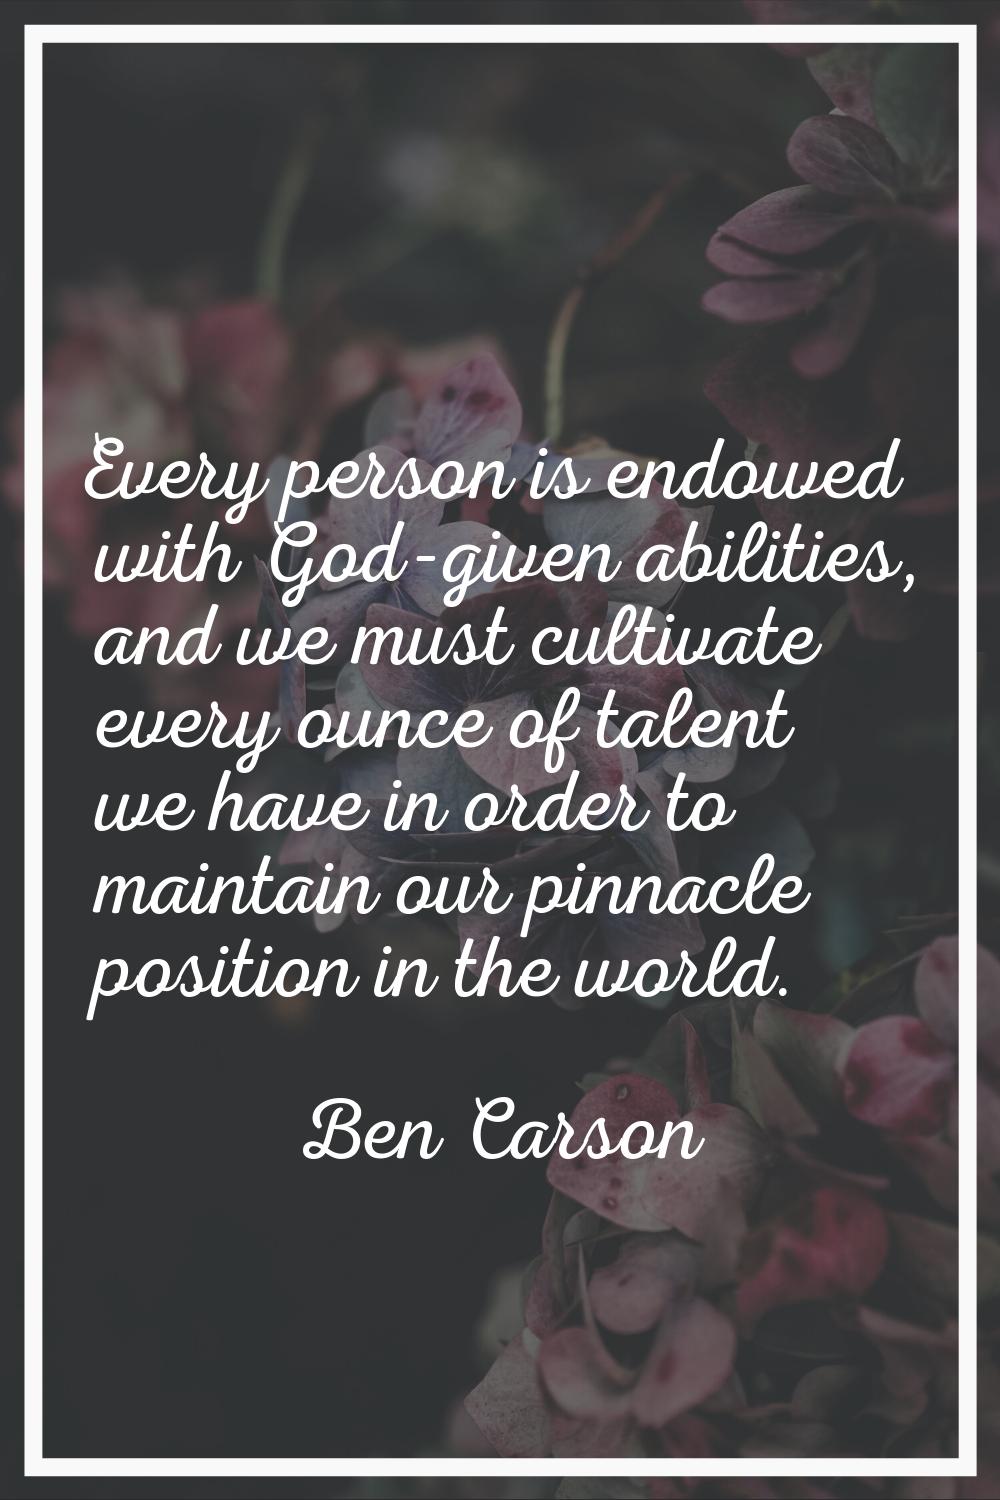 Every person is endowed with God-given abilities, and we must cultivate every ounce of talent we ha